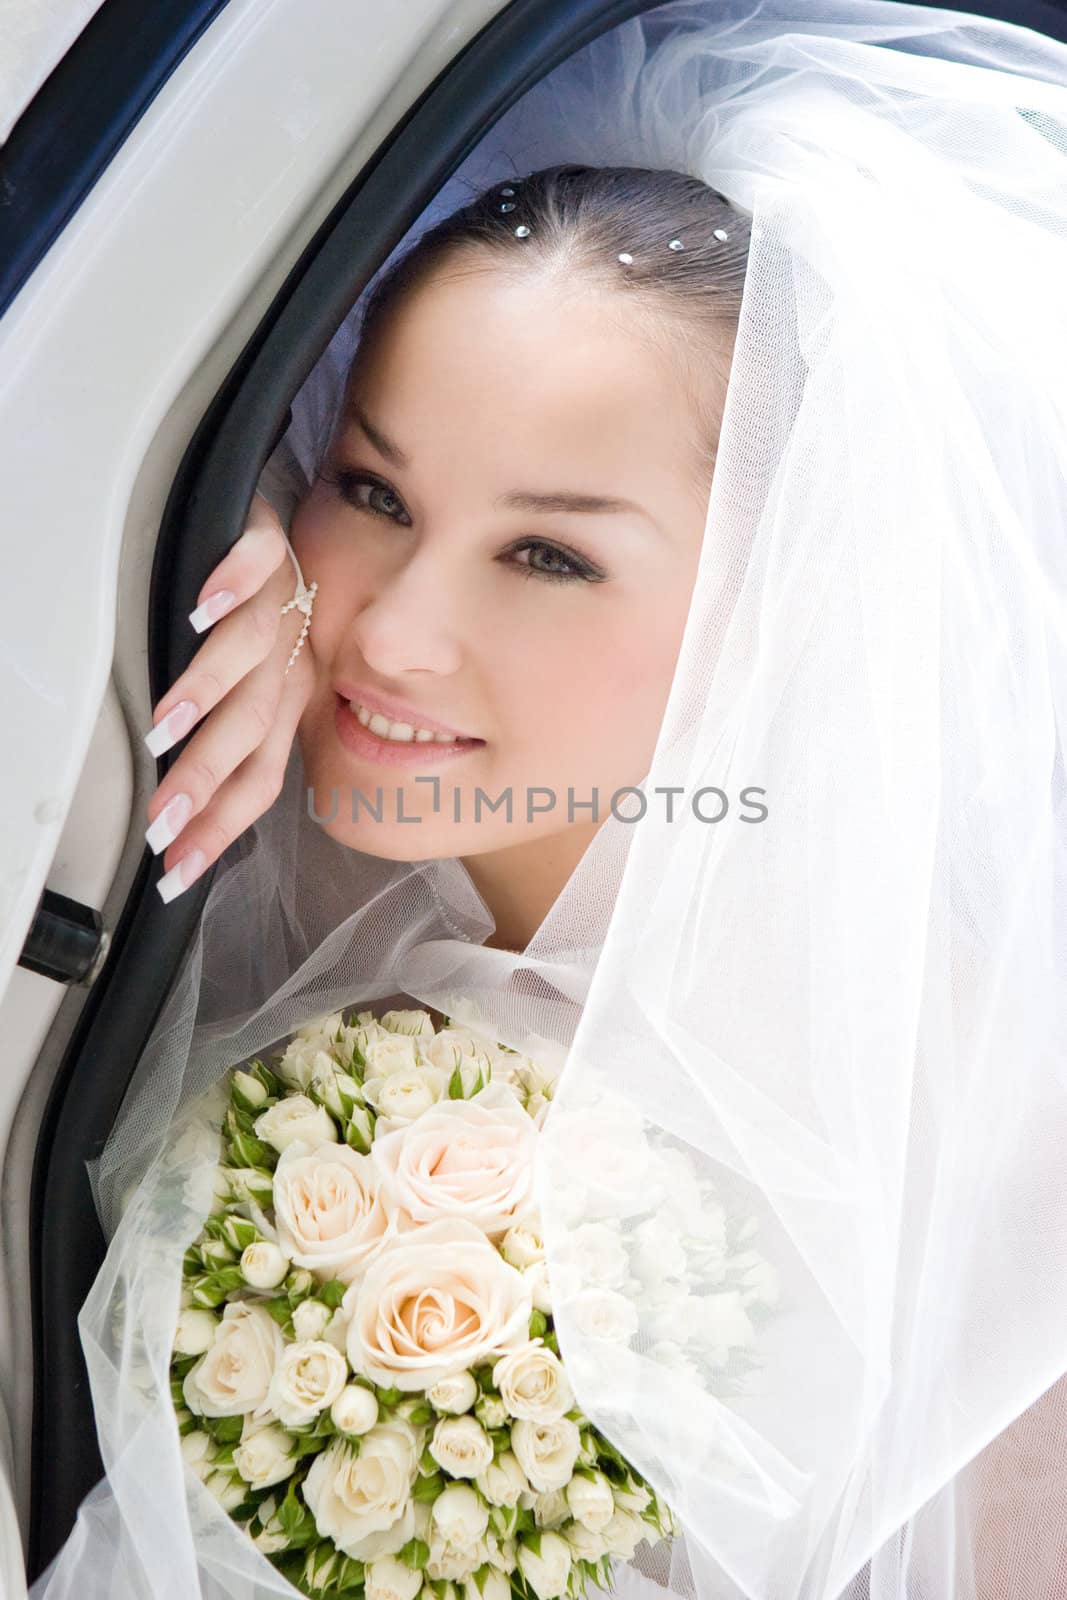 The happy bride with a flower bouquet looks out from the open door of the car